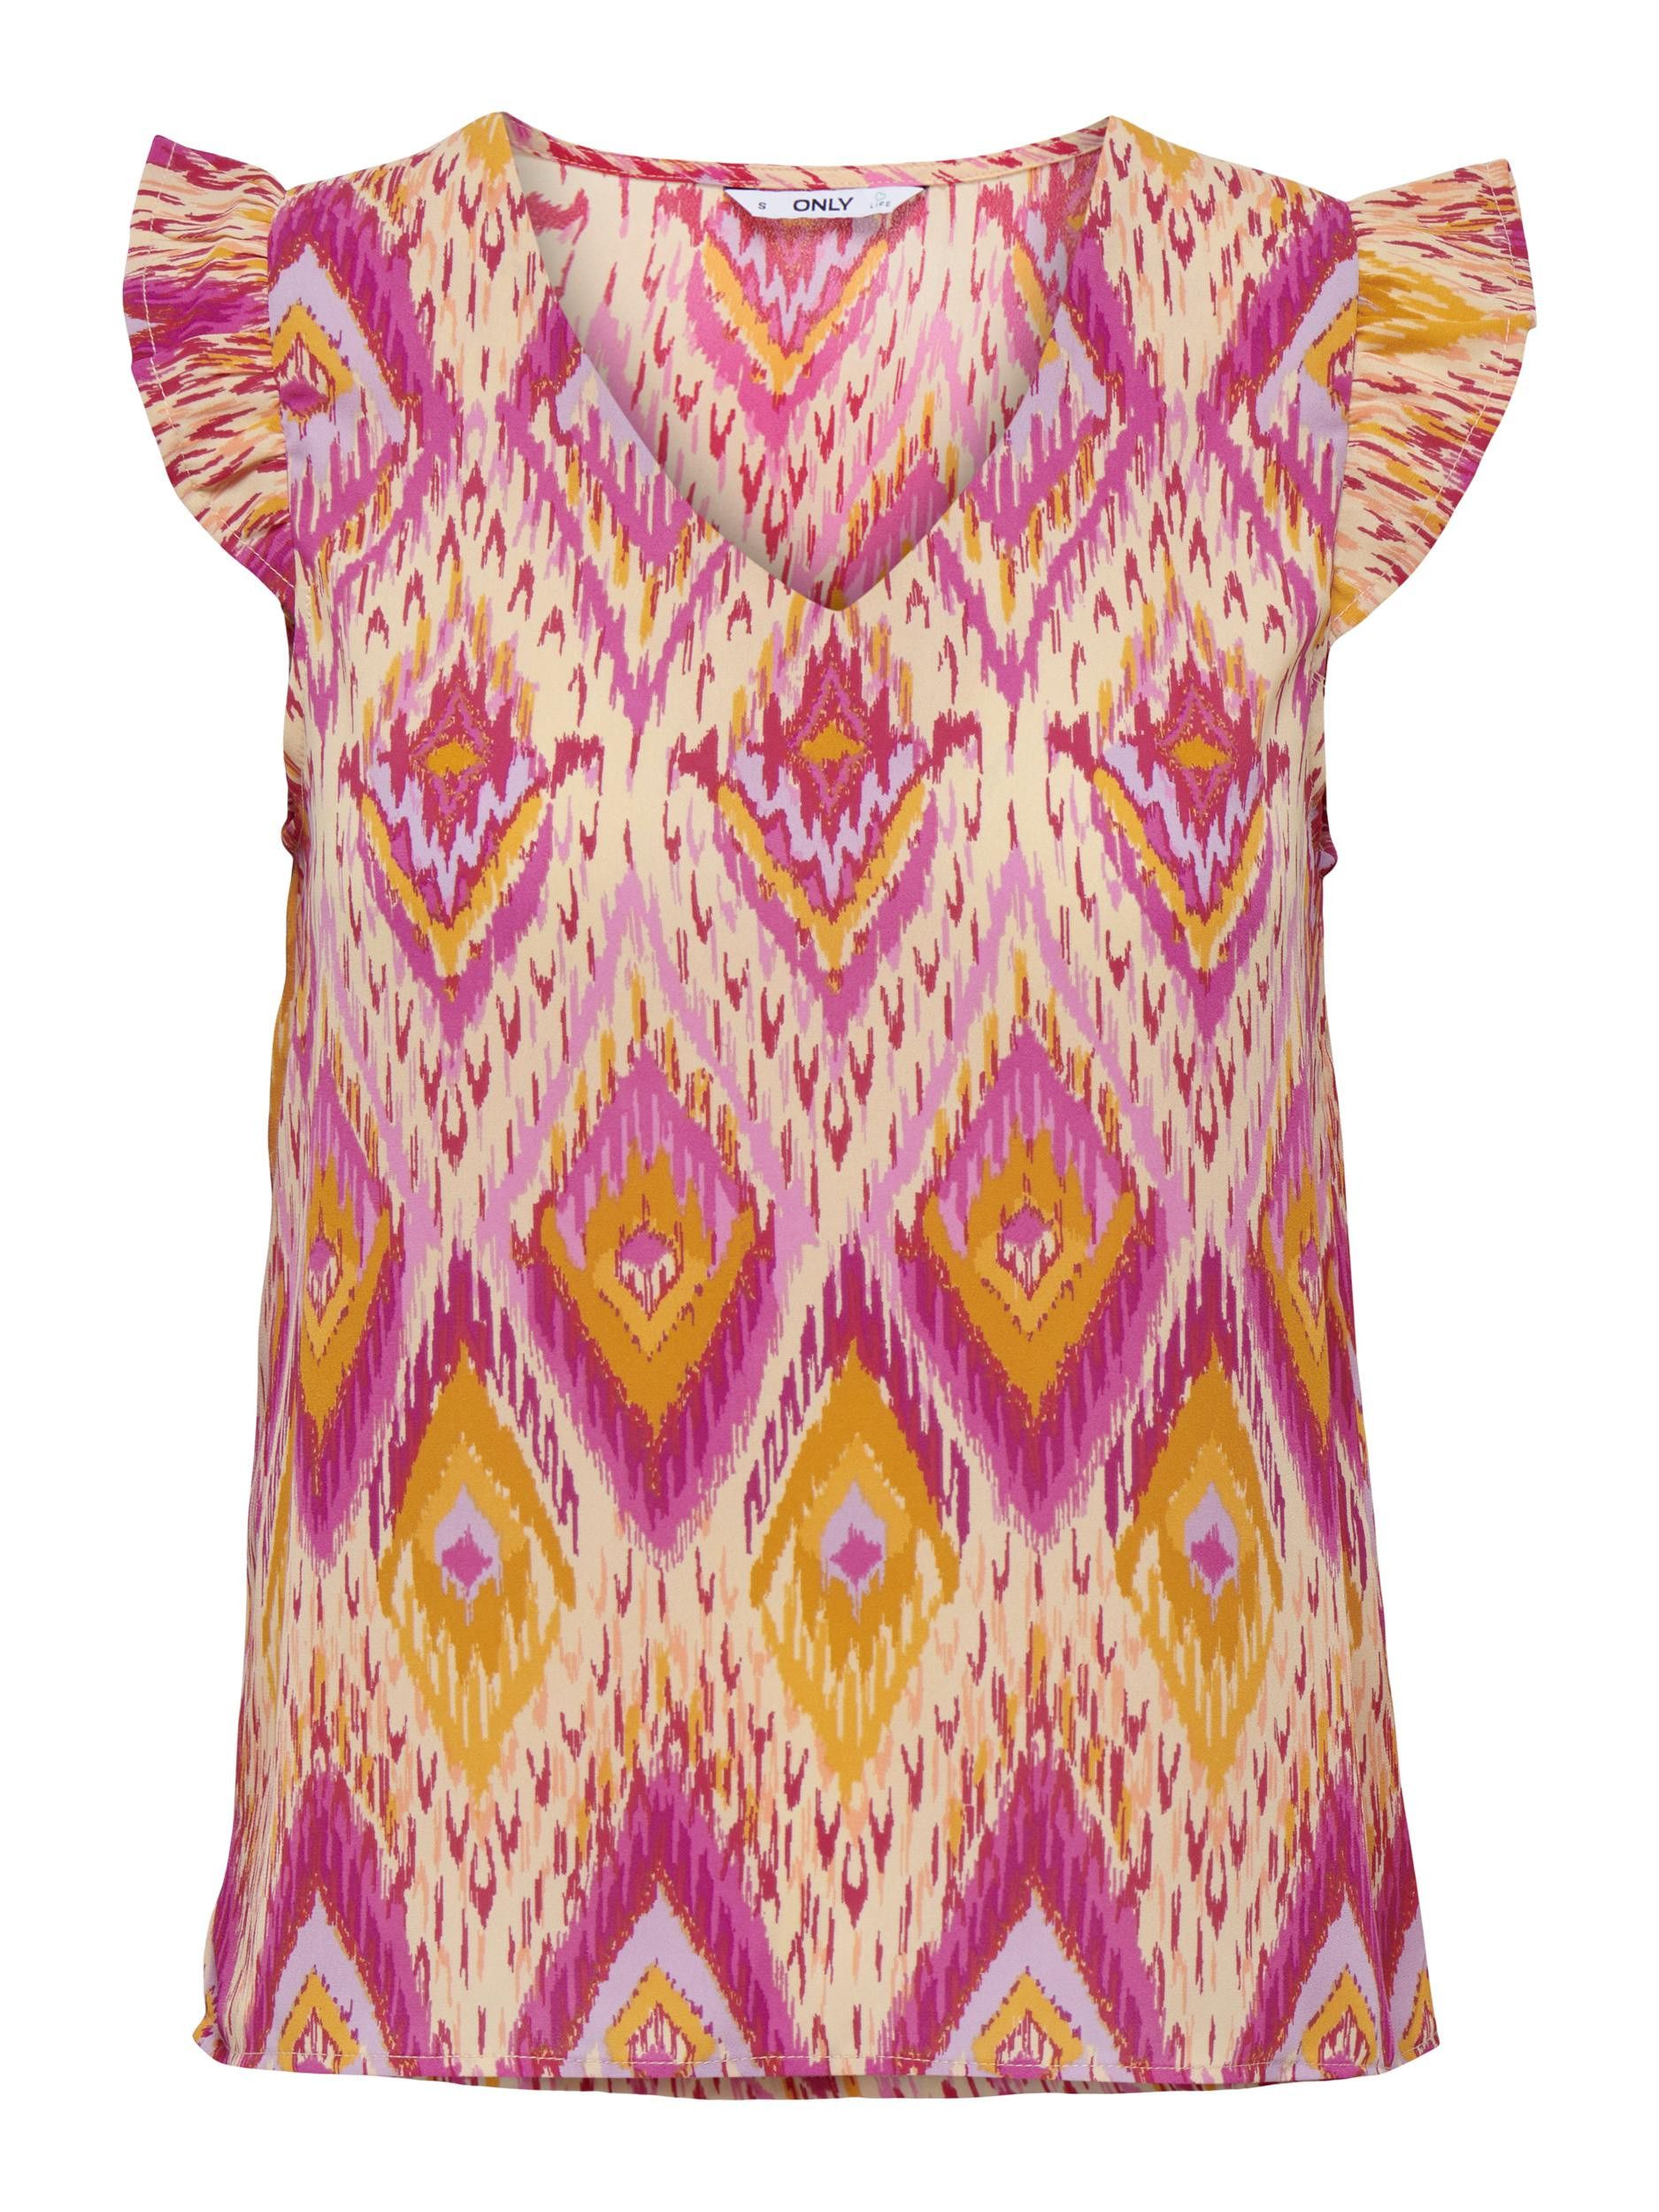 Only - Vest with print, Pink, large image number 0